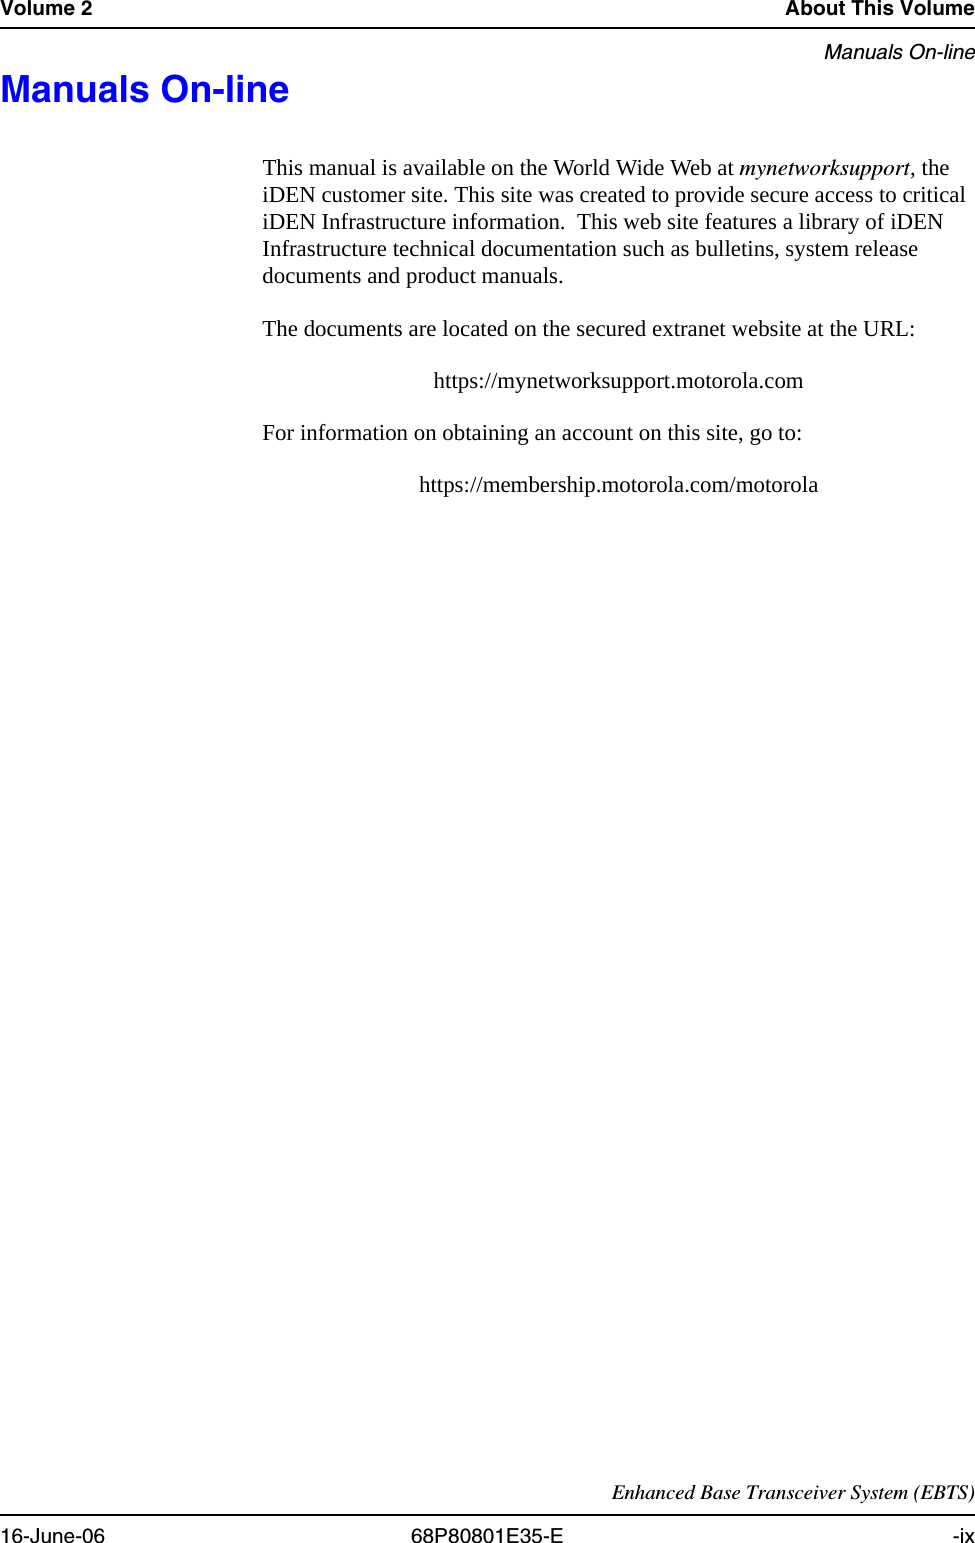 Volume 2 About This VolumeManuals On-lineEnhanced Base Transceiver System (EBTS)16-June-06 68P80801E35-E -ixManuals On-line 0This manual is available on the World Wide Web at mynetworksupport, the iDEN customer site. This site was created to provide secure access to critical iDEN Infrastructure information.  This web site features a library of iDEN Infrastructure technical documentation such as bulletins, system release documents and product manuals.The documents are located on the secured extranet website at the URL:https://mynetworksupport.motorola.com For information on obtaining an account on this site, go to:https://membership.motorola.com/motorola